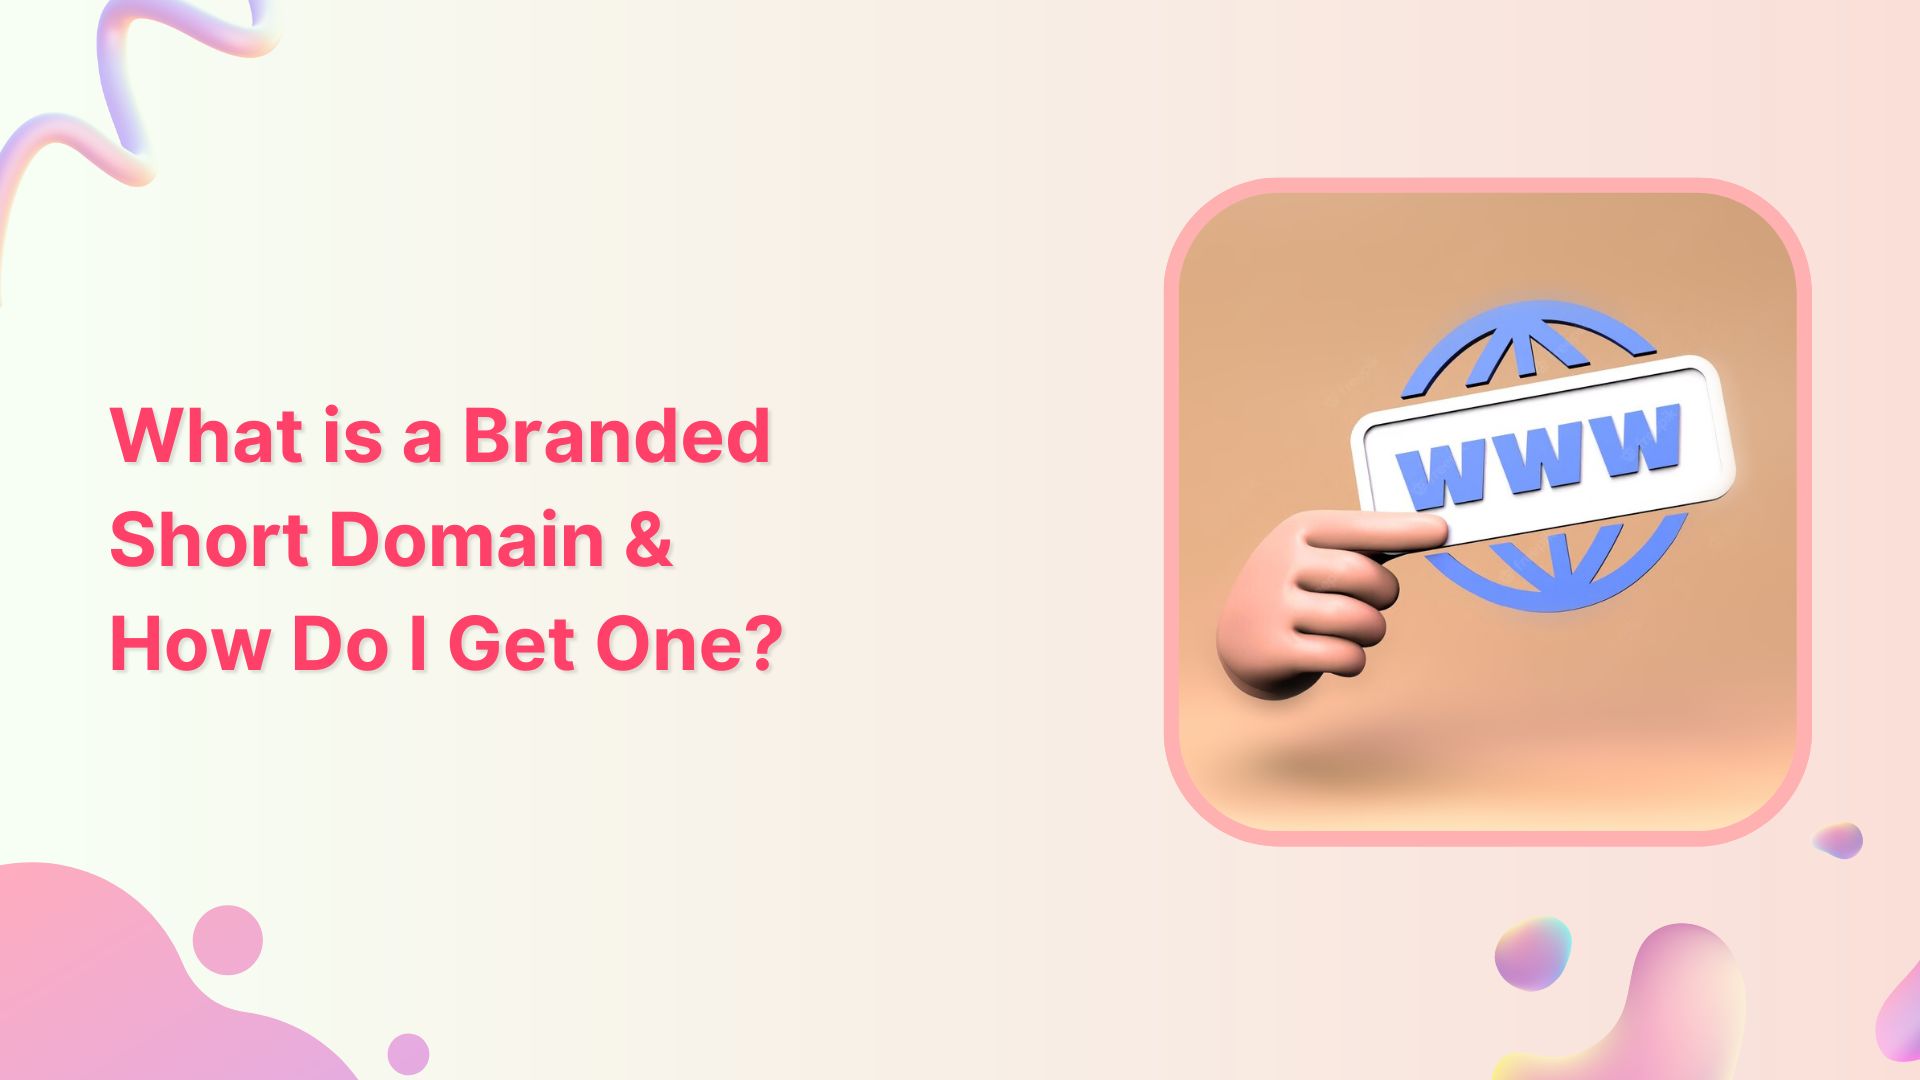 What is a Branded Short Domain and How Do I Get One?